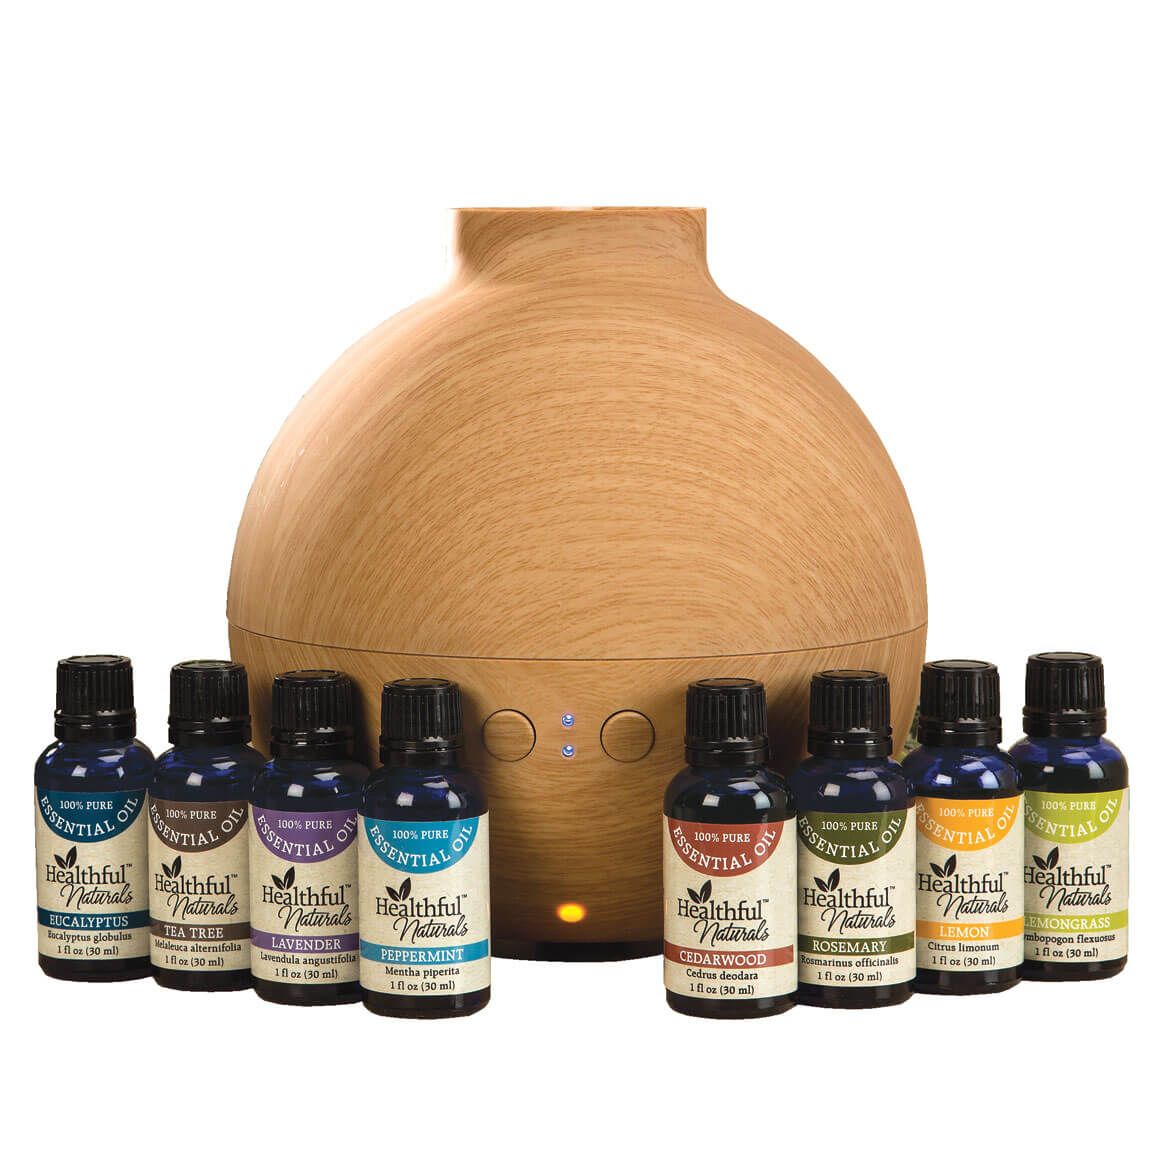 Healthful™ Naturals Deluxe Kit and 600 ml Diffuser + '-' + 356538